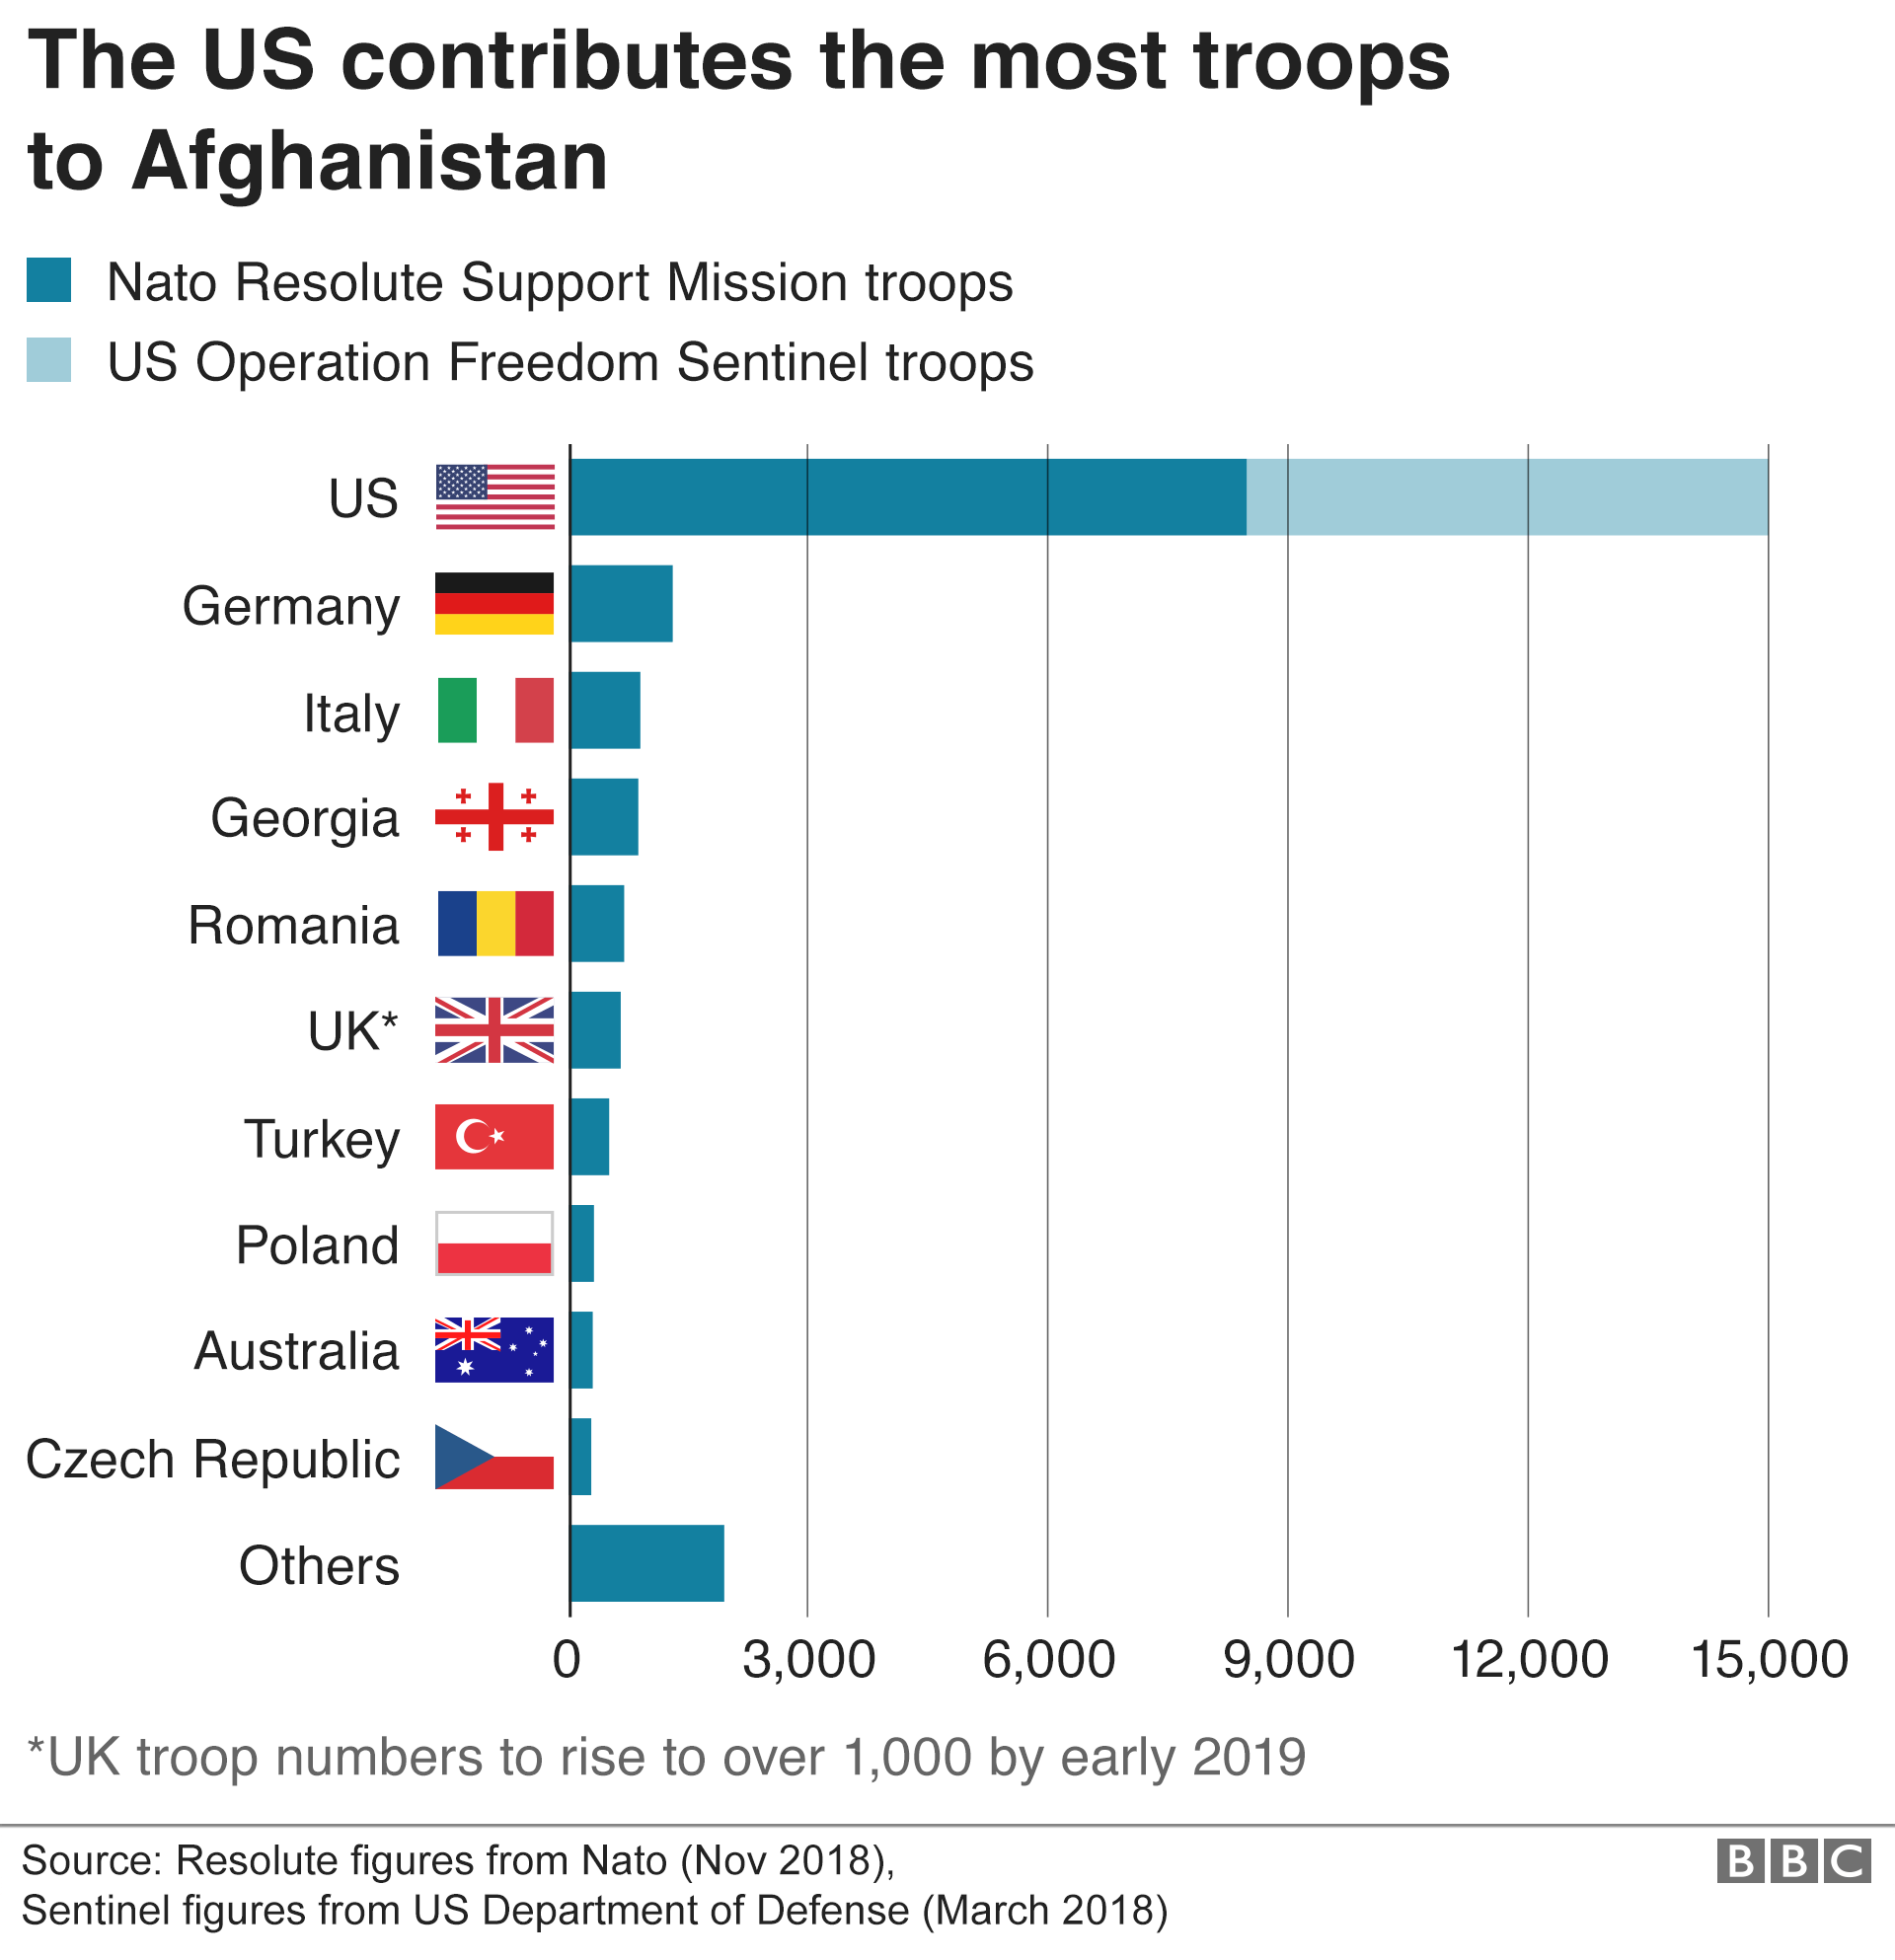 Chart showing the countries that contribute troops to Afghanistan - with the US contributing the most troops by far